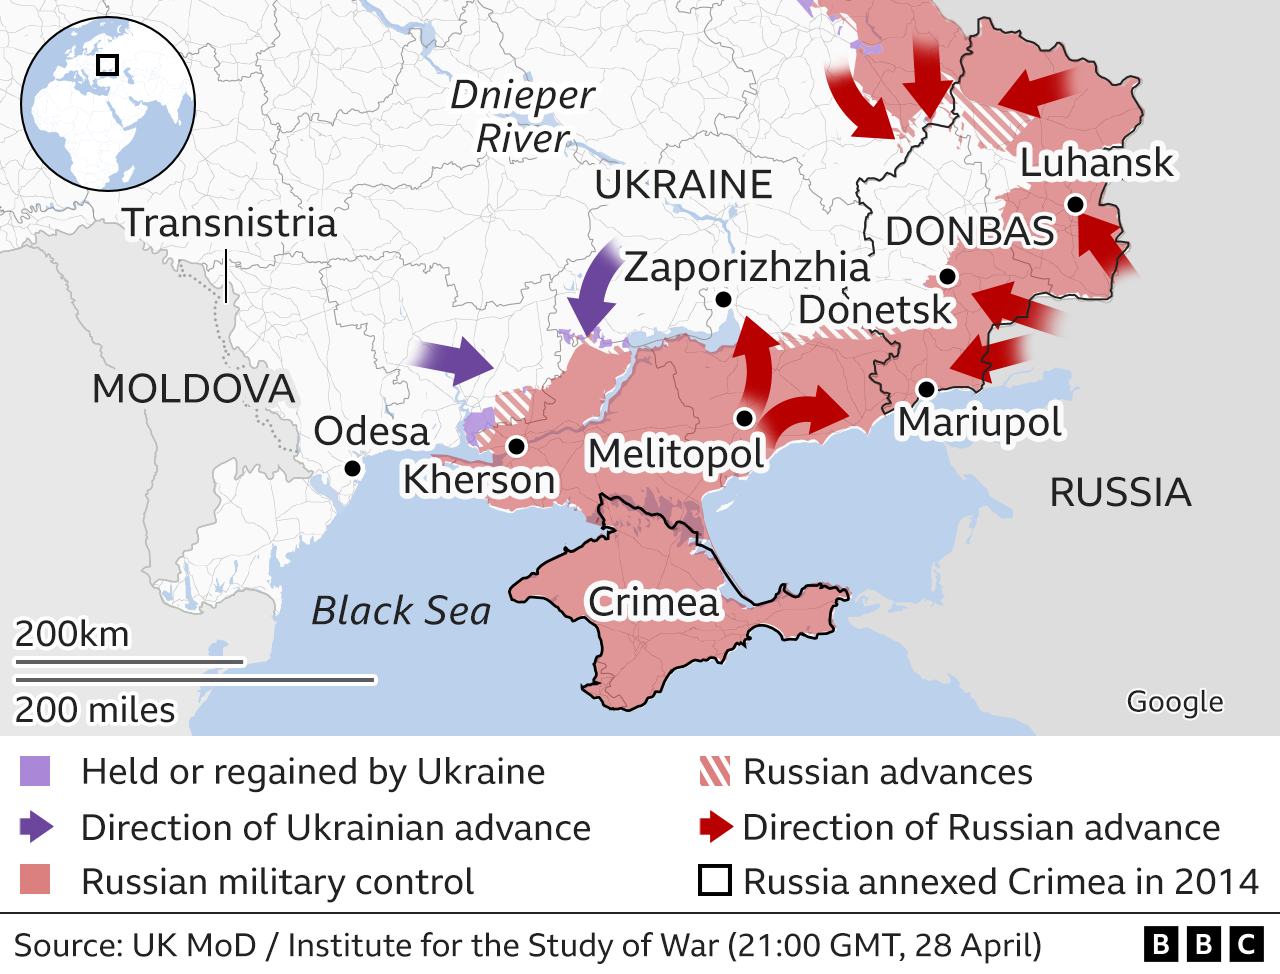 Map showing how Russian forces have moved in on Mariupol